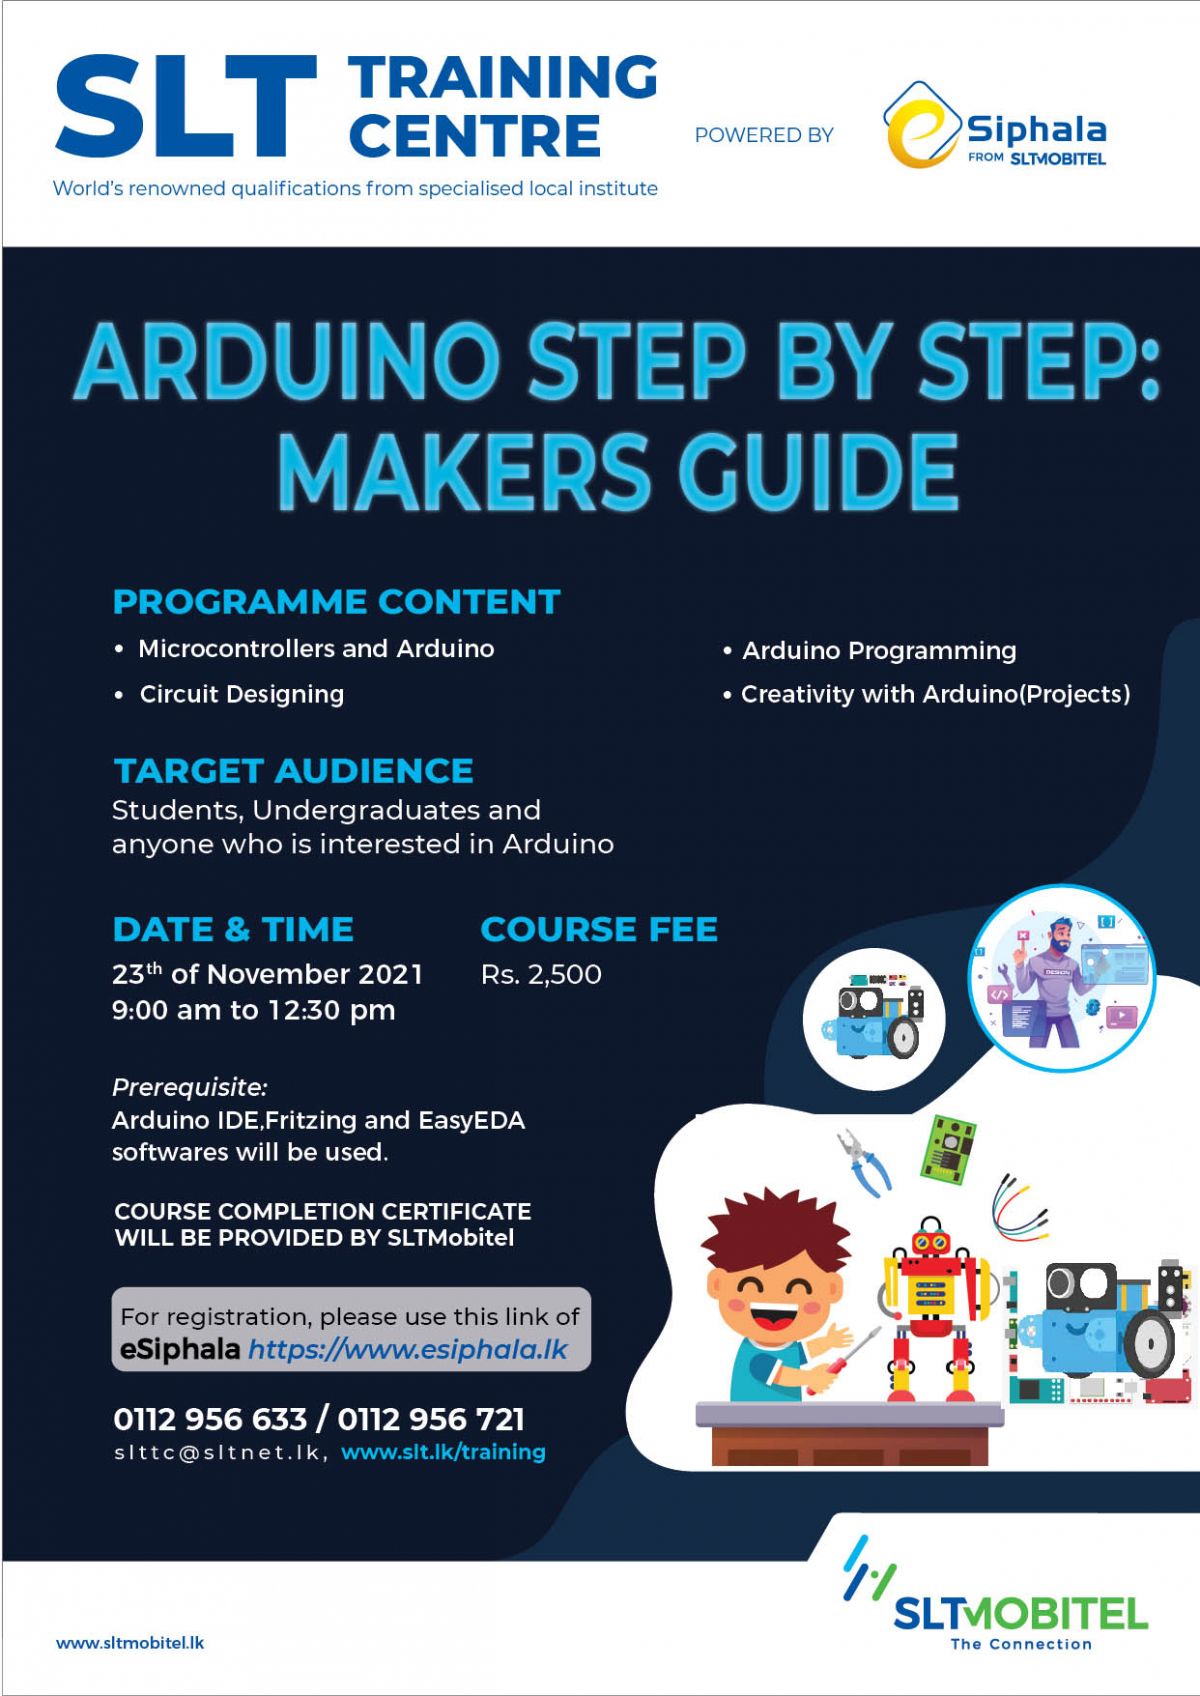 Arduino step by step: makers guide-November 2021